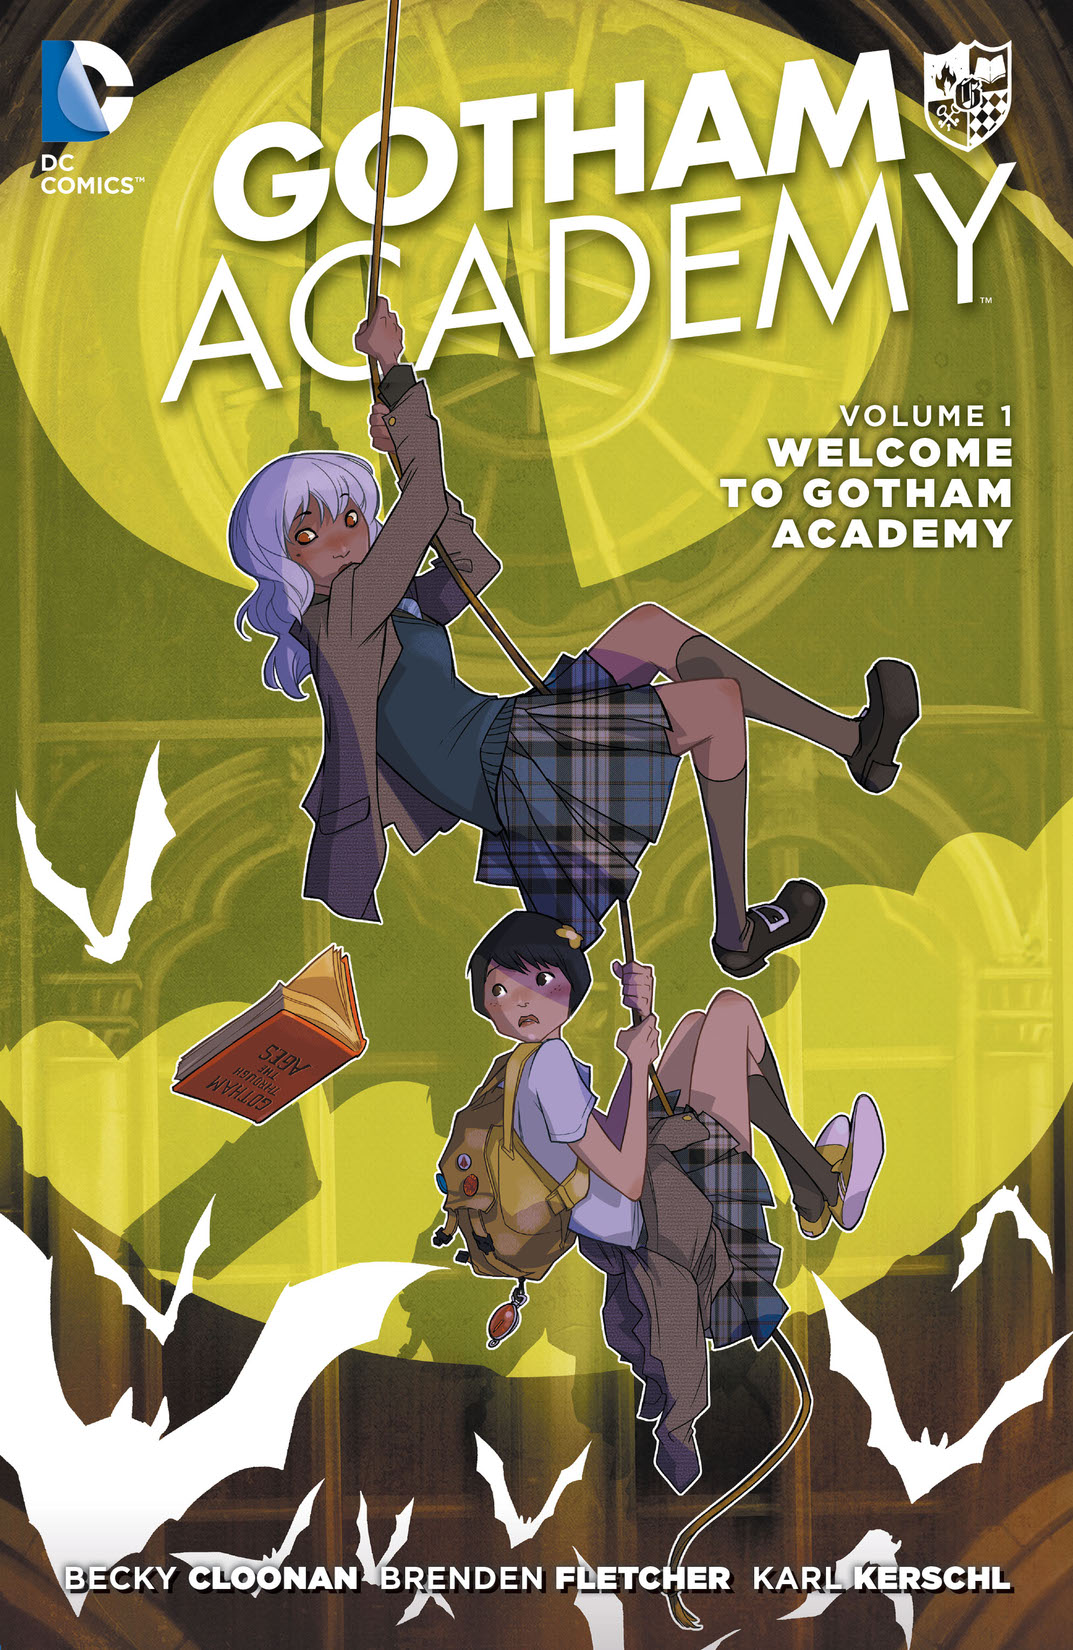 Gotham Academy Vol. 1: Welcome to Gotham Academy preview images